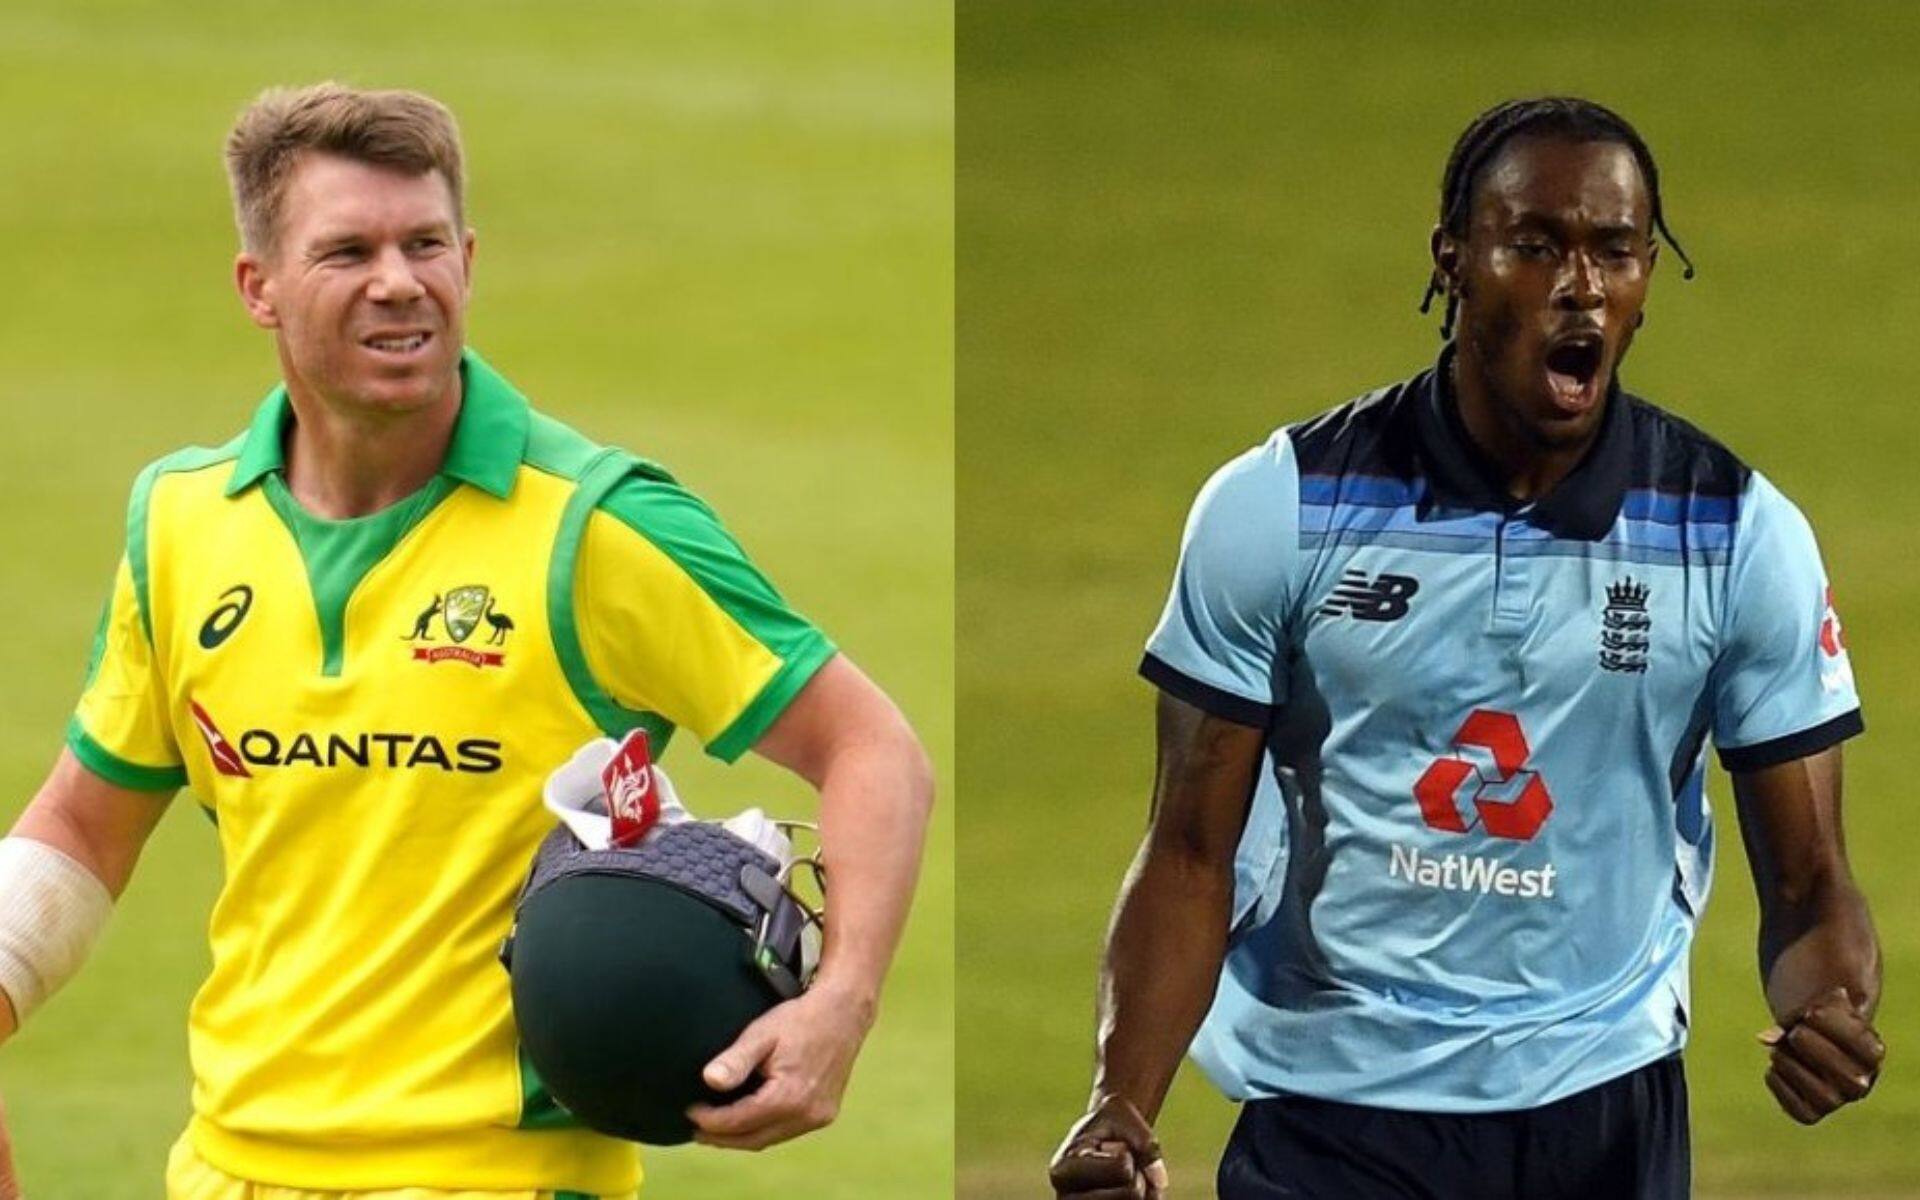 Jofra Archer and David Warner battle will be a key one (X.com)